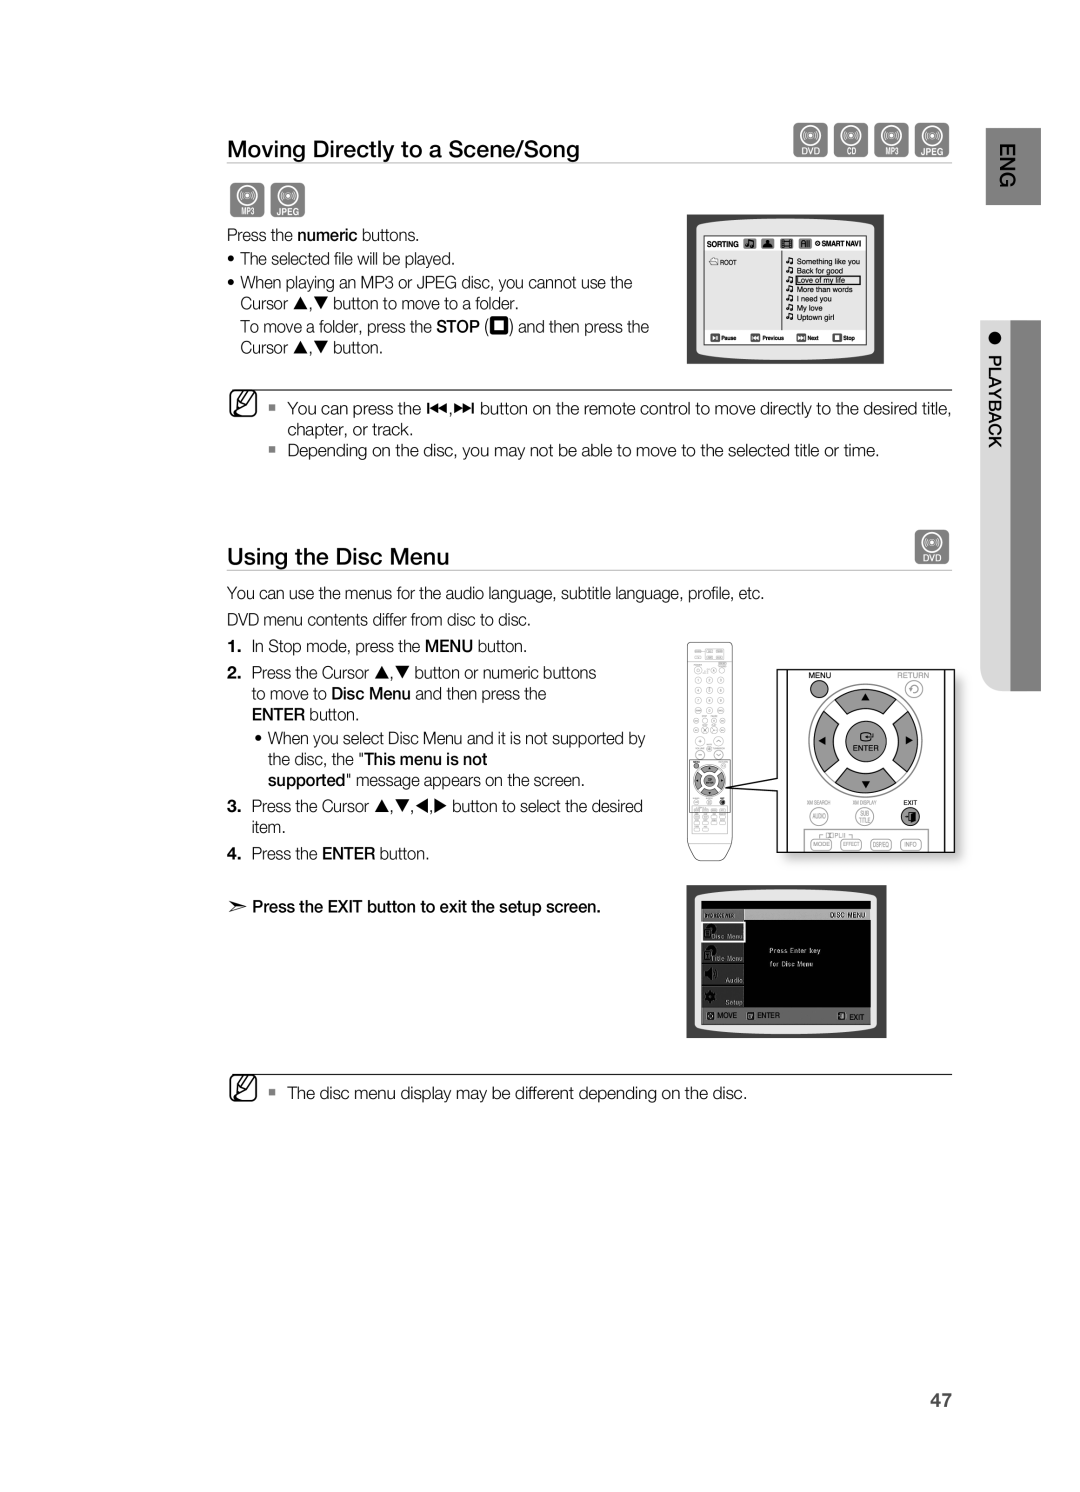 Samsung HT-TZ515 user manual dBAG, Moving Directly to a Scene/Song, Using the Disc Menu 